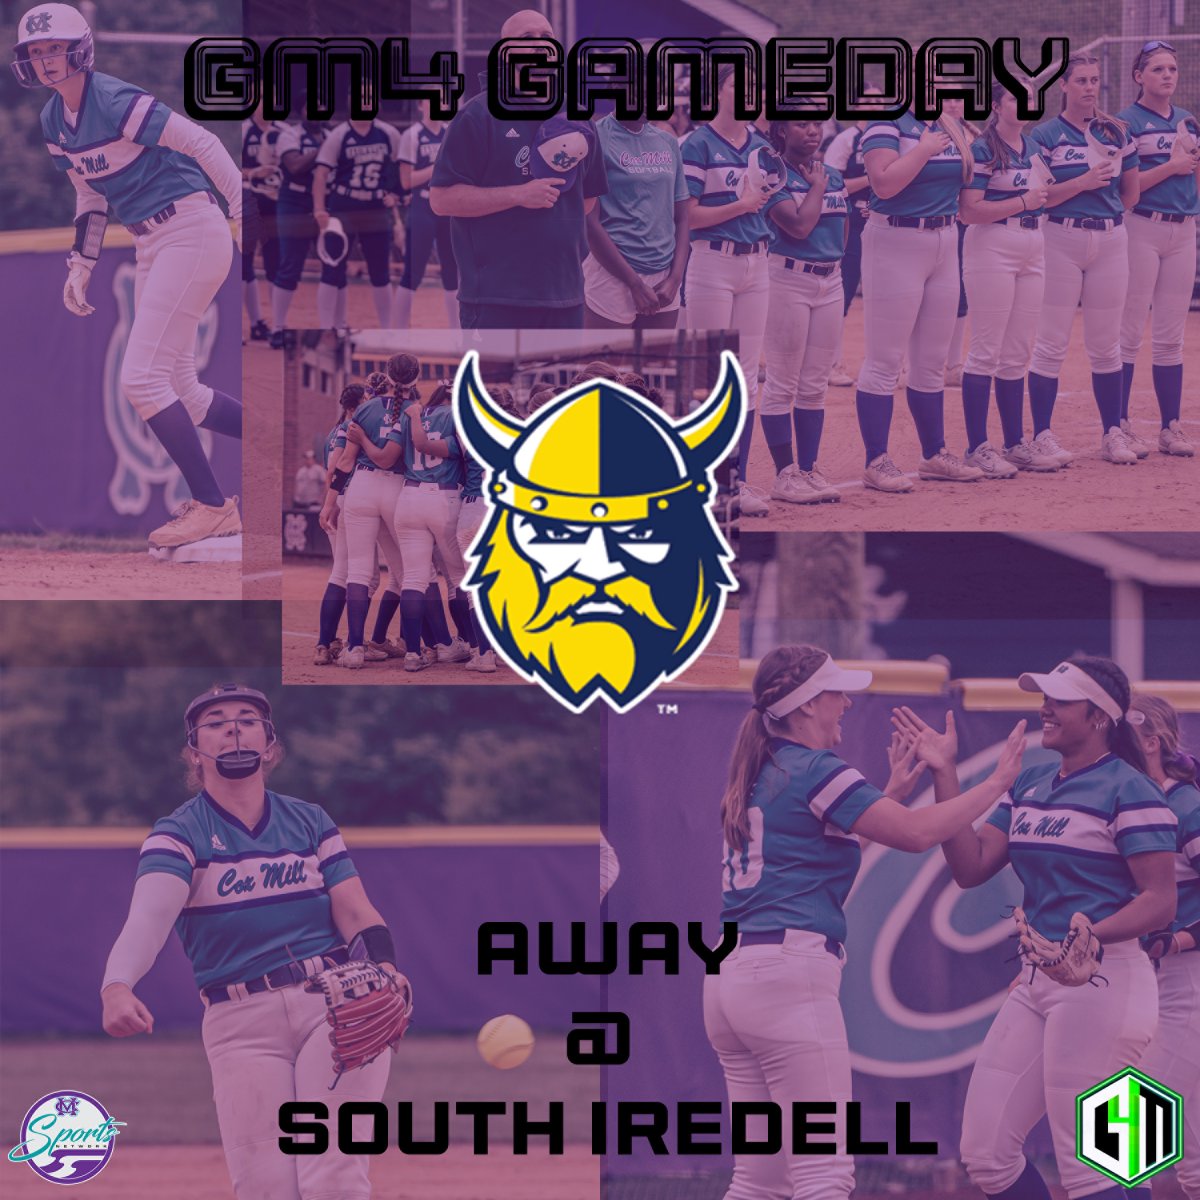 Last gameday of the week! Come out and support our wonderful ladies tonight at South Iredell High school. @CoxMillSports @CoxMillSN @Gm4Sports